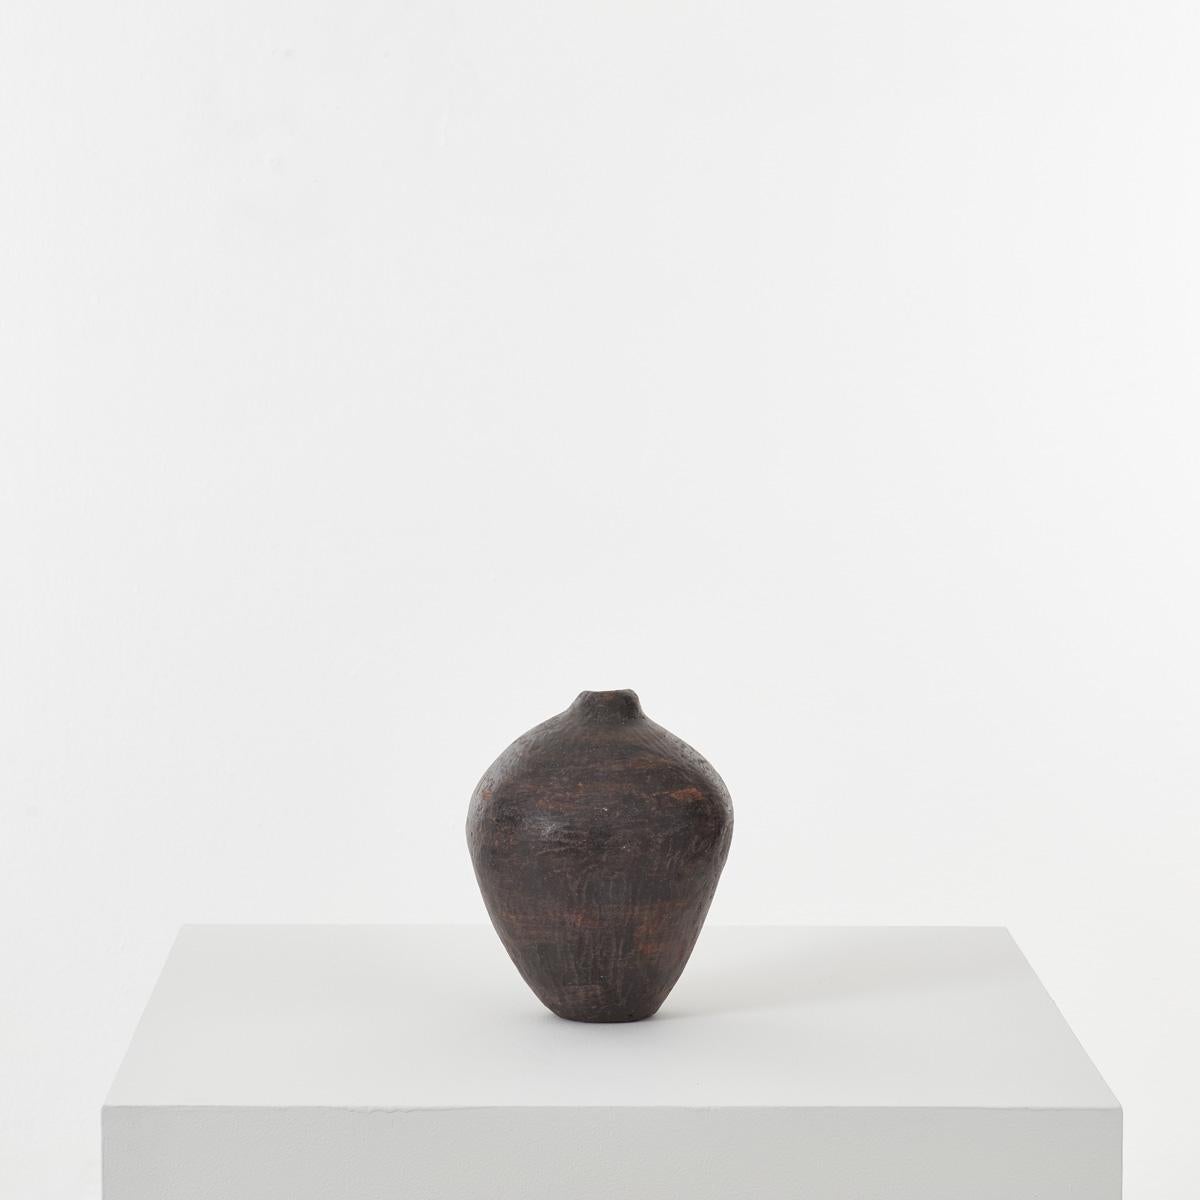 Maria Vlandi is a Greek fine art ceramic sculptor who has exhibited internationally. Vlandi primarily uses stoneware clay to create abstracted and monumental forms, presenting her own discourse on form and space. As much about voids as matter,